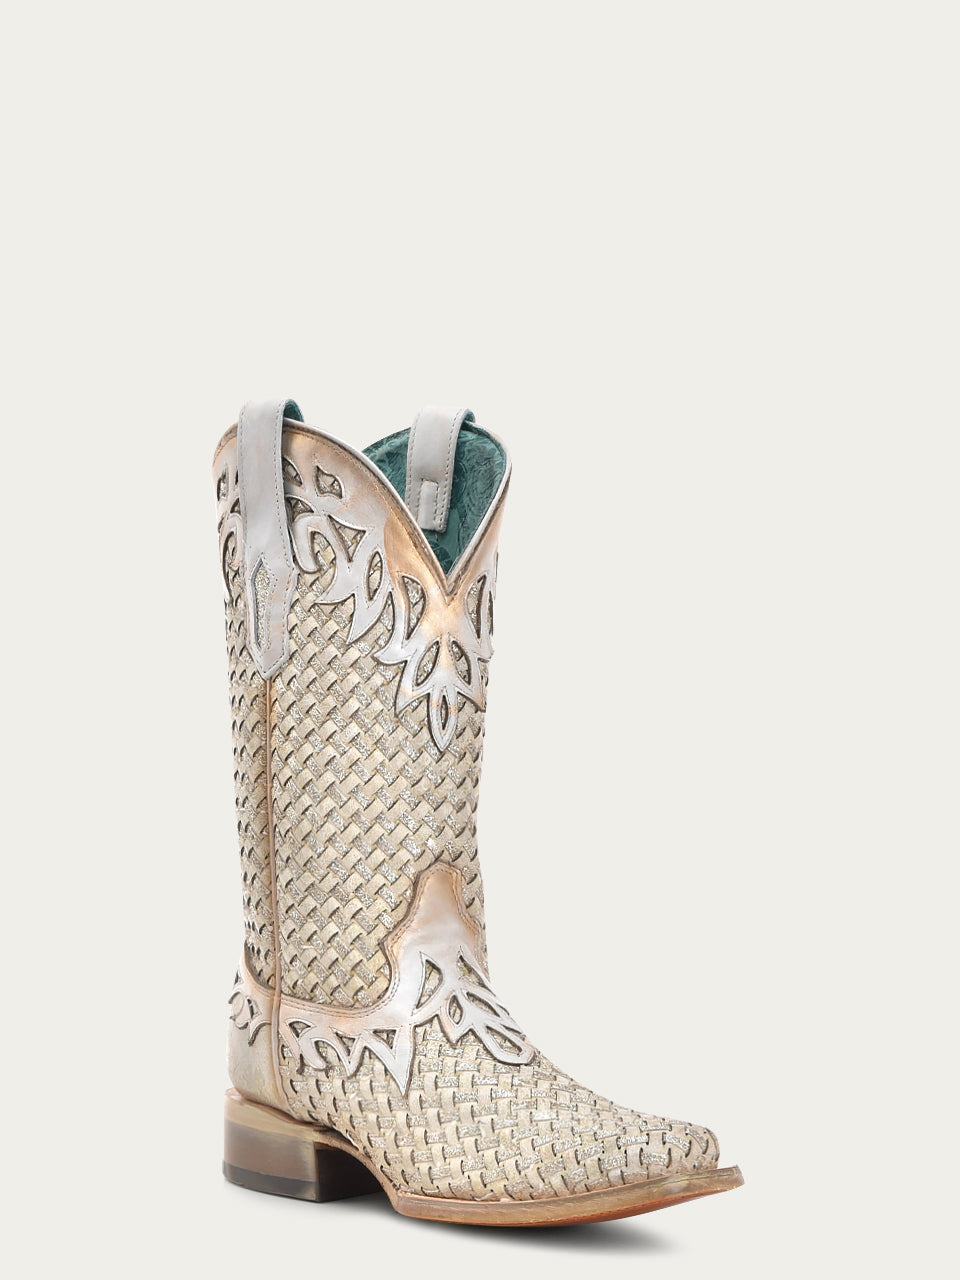 A4524 - WOMEN'S WHITE GLITTER WOVEN OVERLAY SQUARE TOE COWBOY BOOT